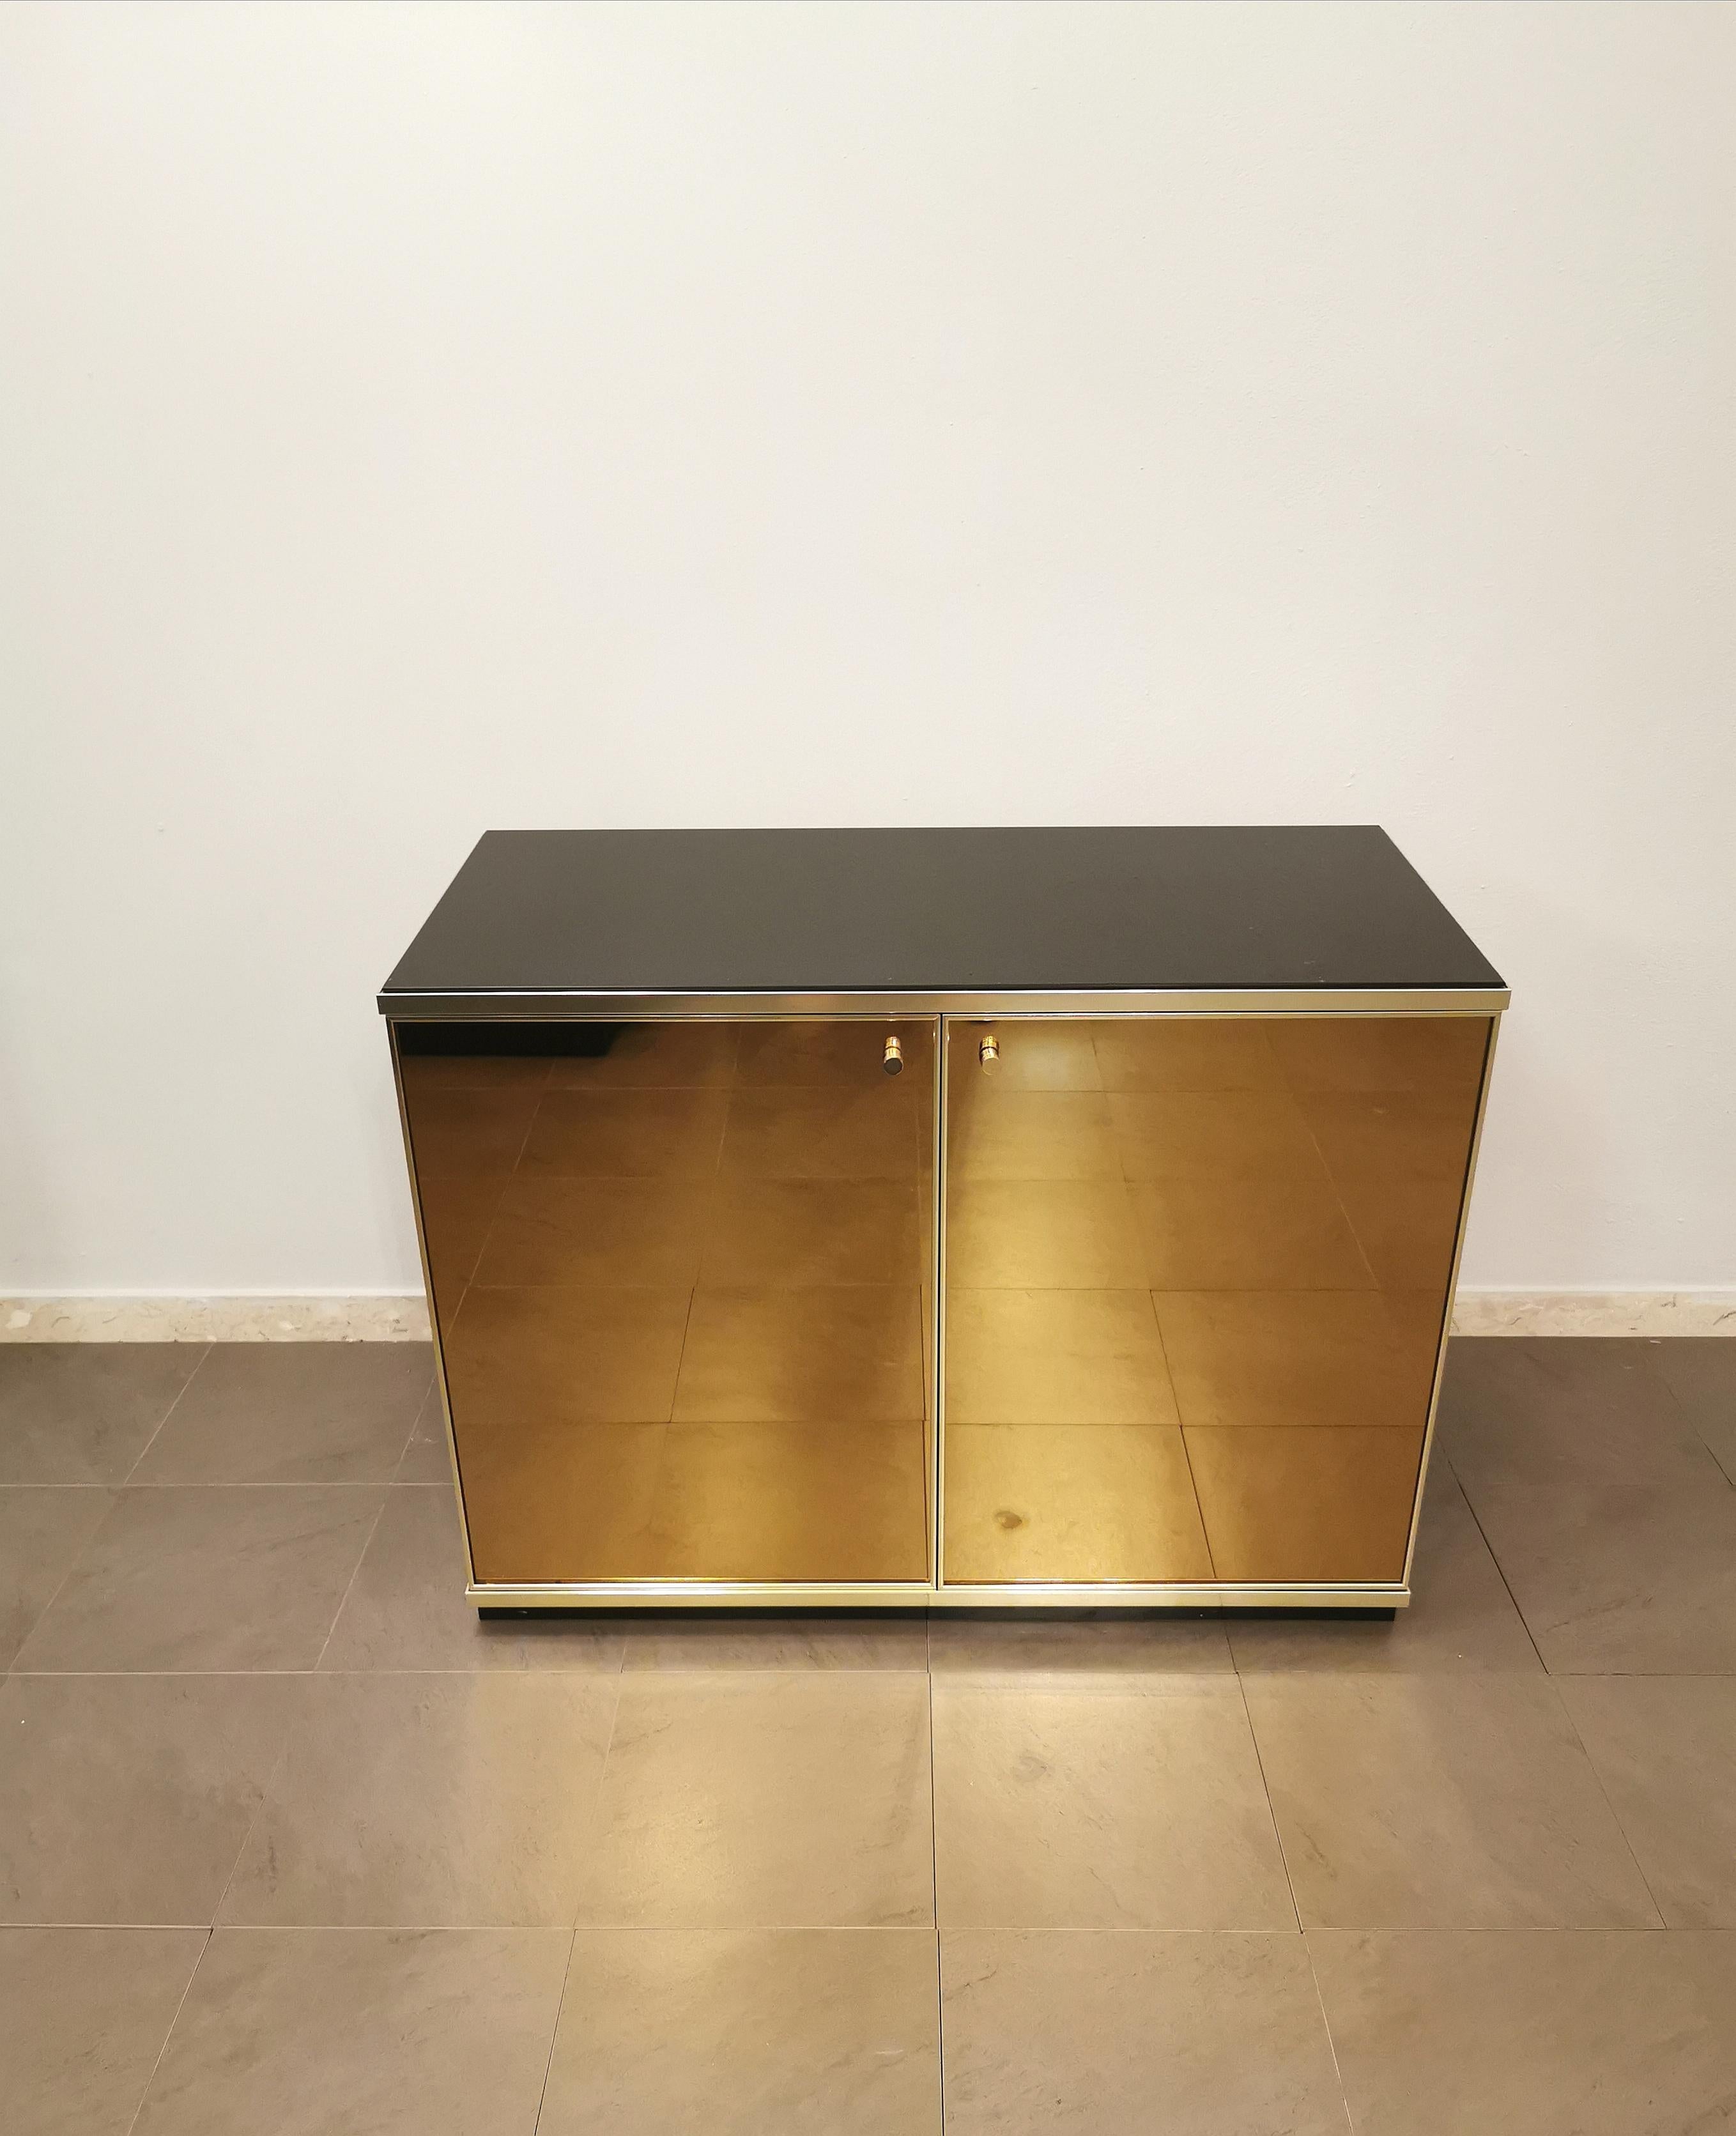 Elegant and rare buffet designed by the Italian designer Renato Zevi in the 70s. The buffet has a black lacquered wooden structure, a dark glass top, 2 bronze mirrored glass doors with sand-colored suede inside and 1 wooden shelf. Finishes in gilded